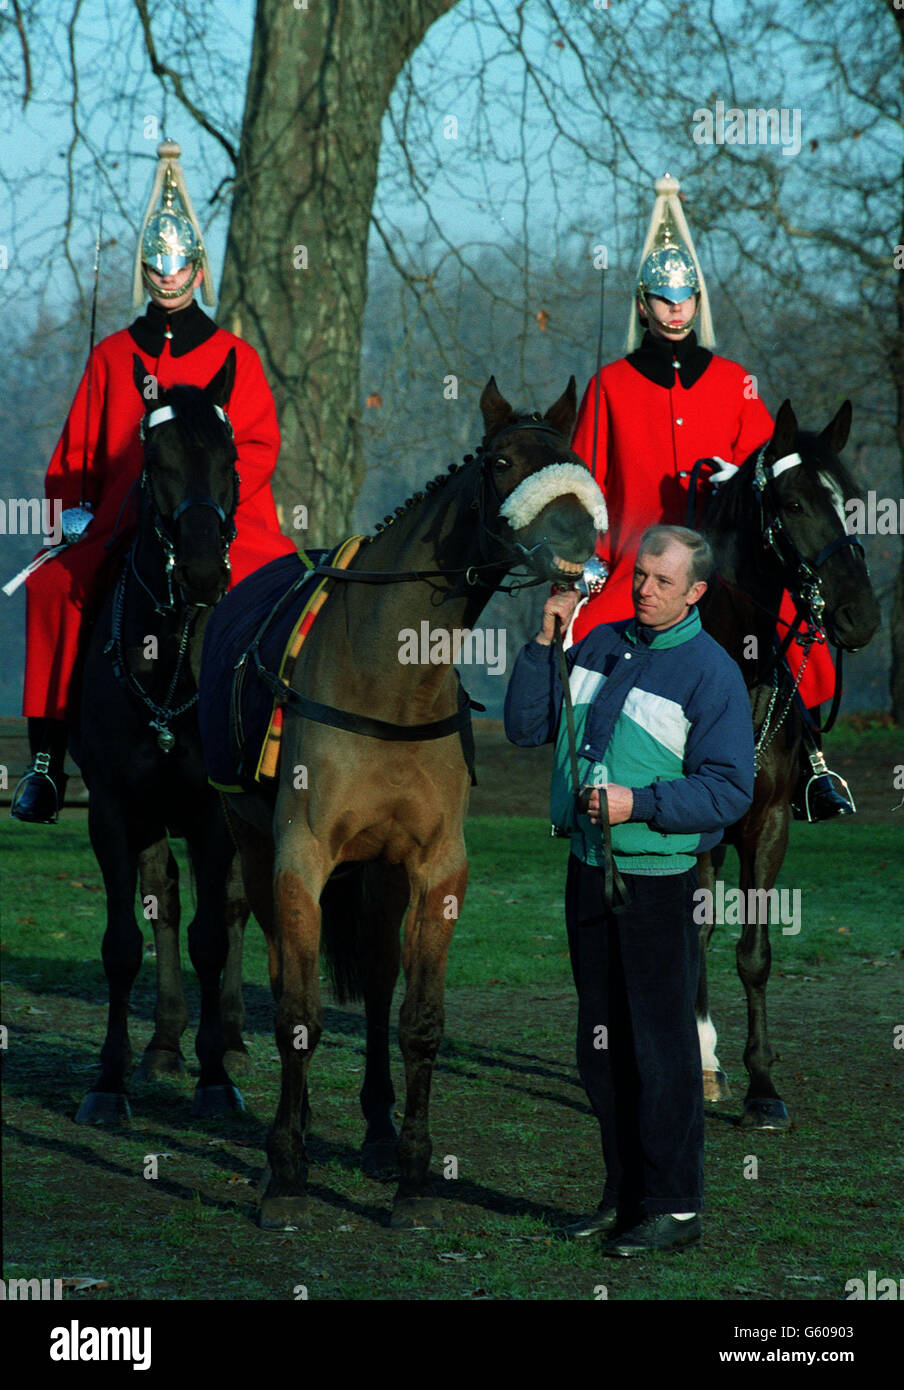 Triple Grand National winner Red Rum with groom Ken Critchley on a visit to the Household Cavalry at their Hyde Park barracks. * 03/04/03 One of the horseshoes of Red Rum from when he won his third and record-breaking Grand National in 1977 will go on sale, it was announced, during Sotheby's Sporting Sale in November. Stock Photo